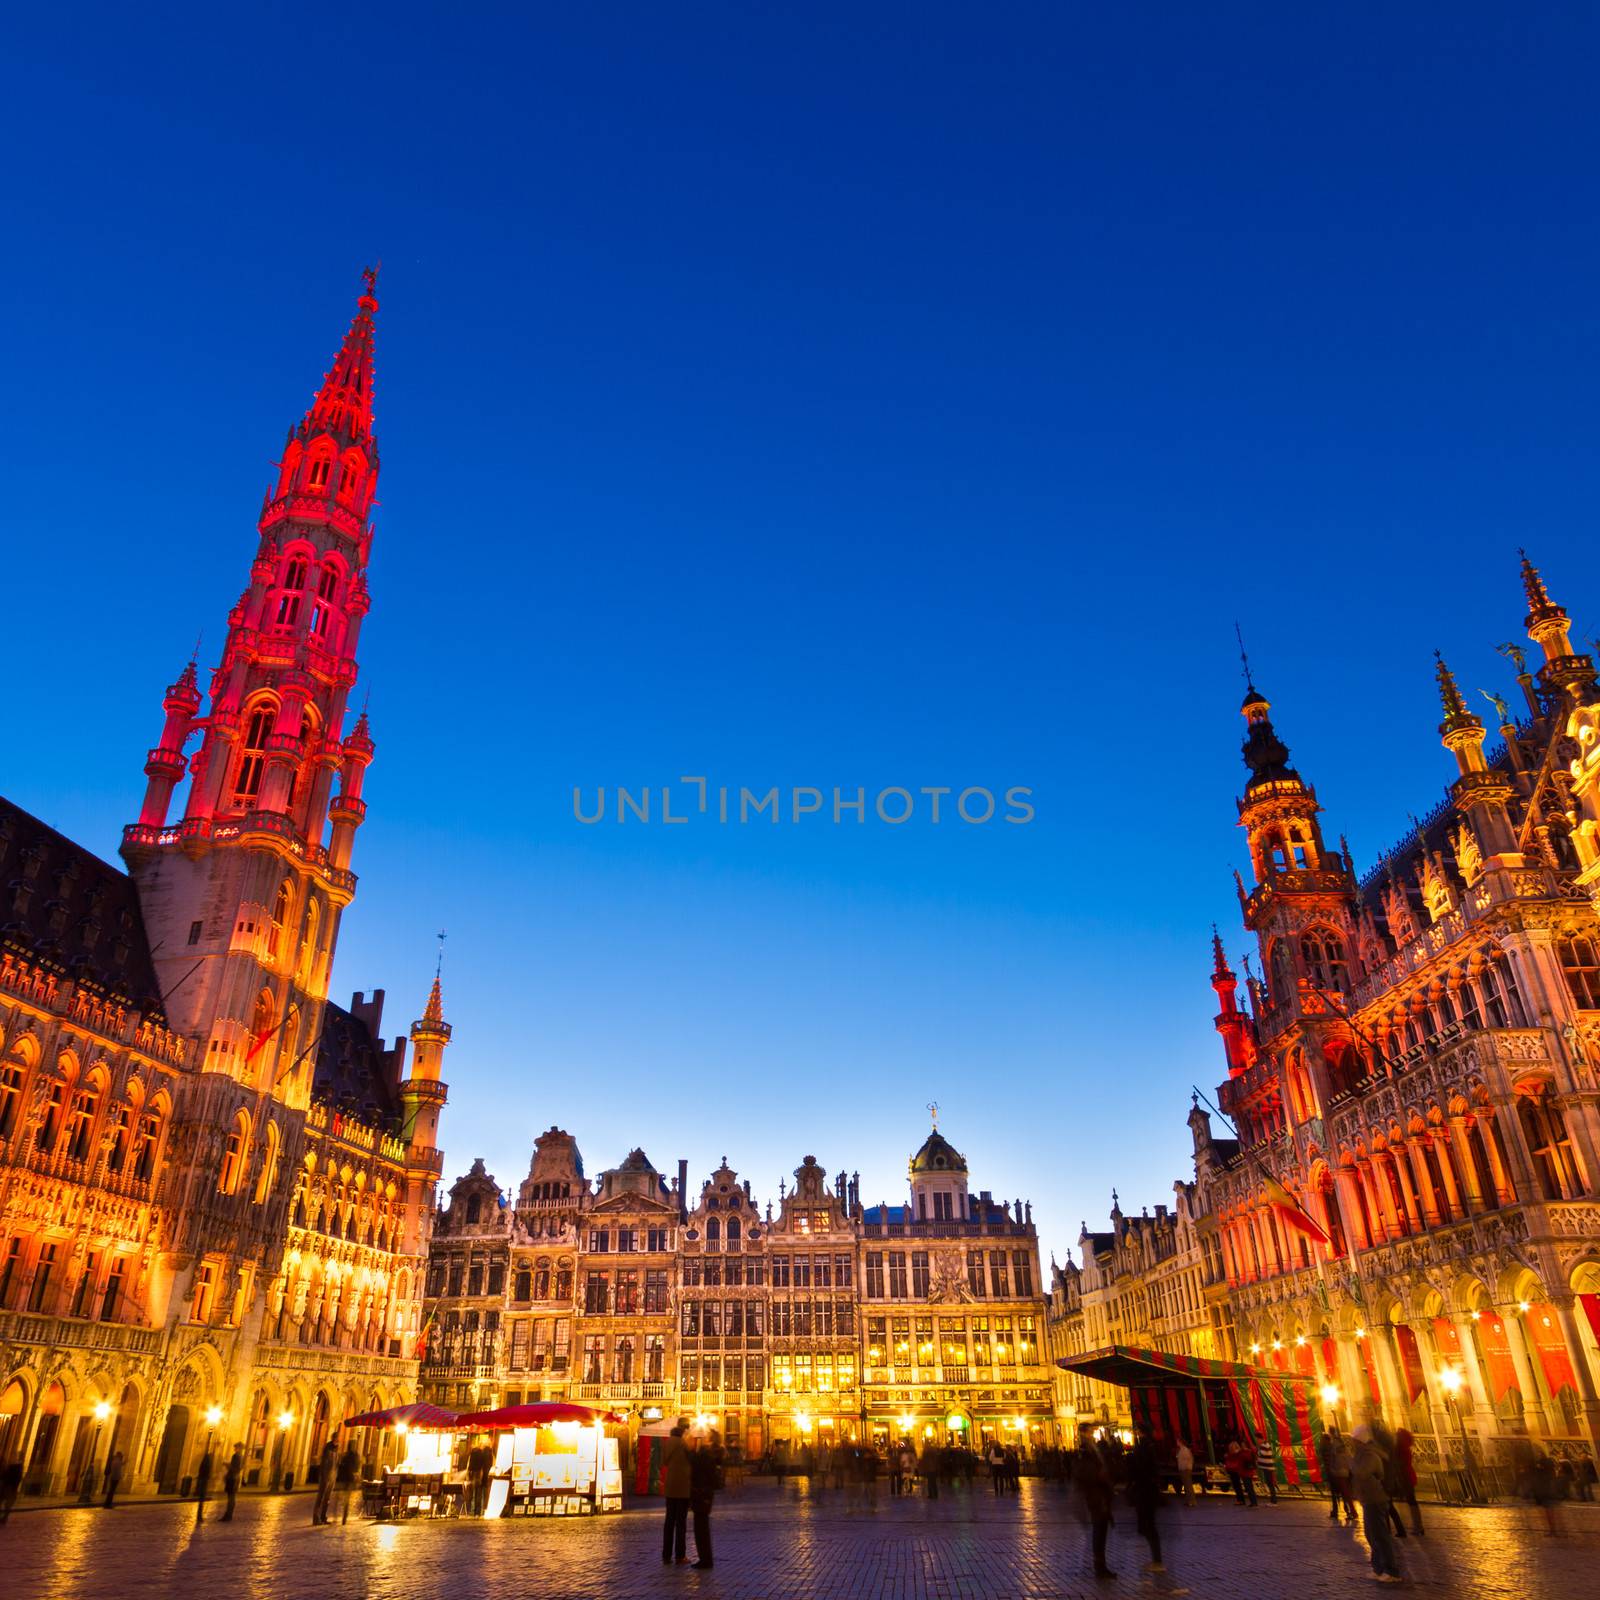 Grote Markt - The main square and Town hall of Brussels, Belgium, Europe.